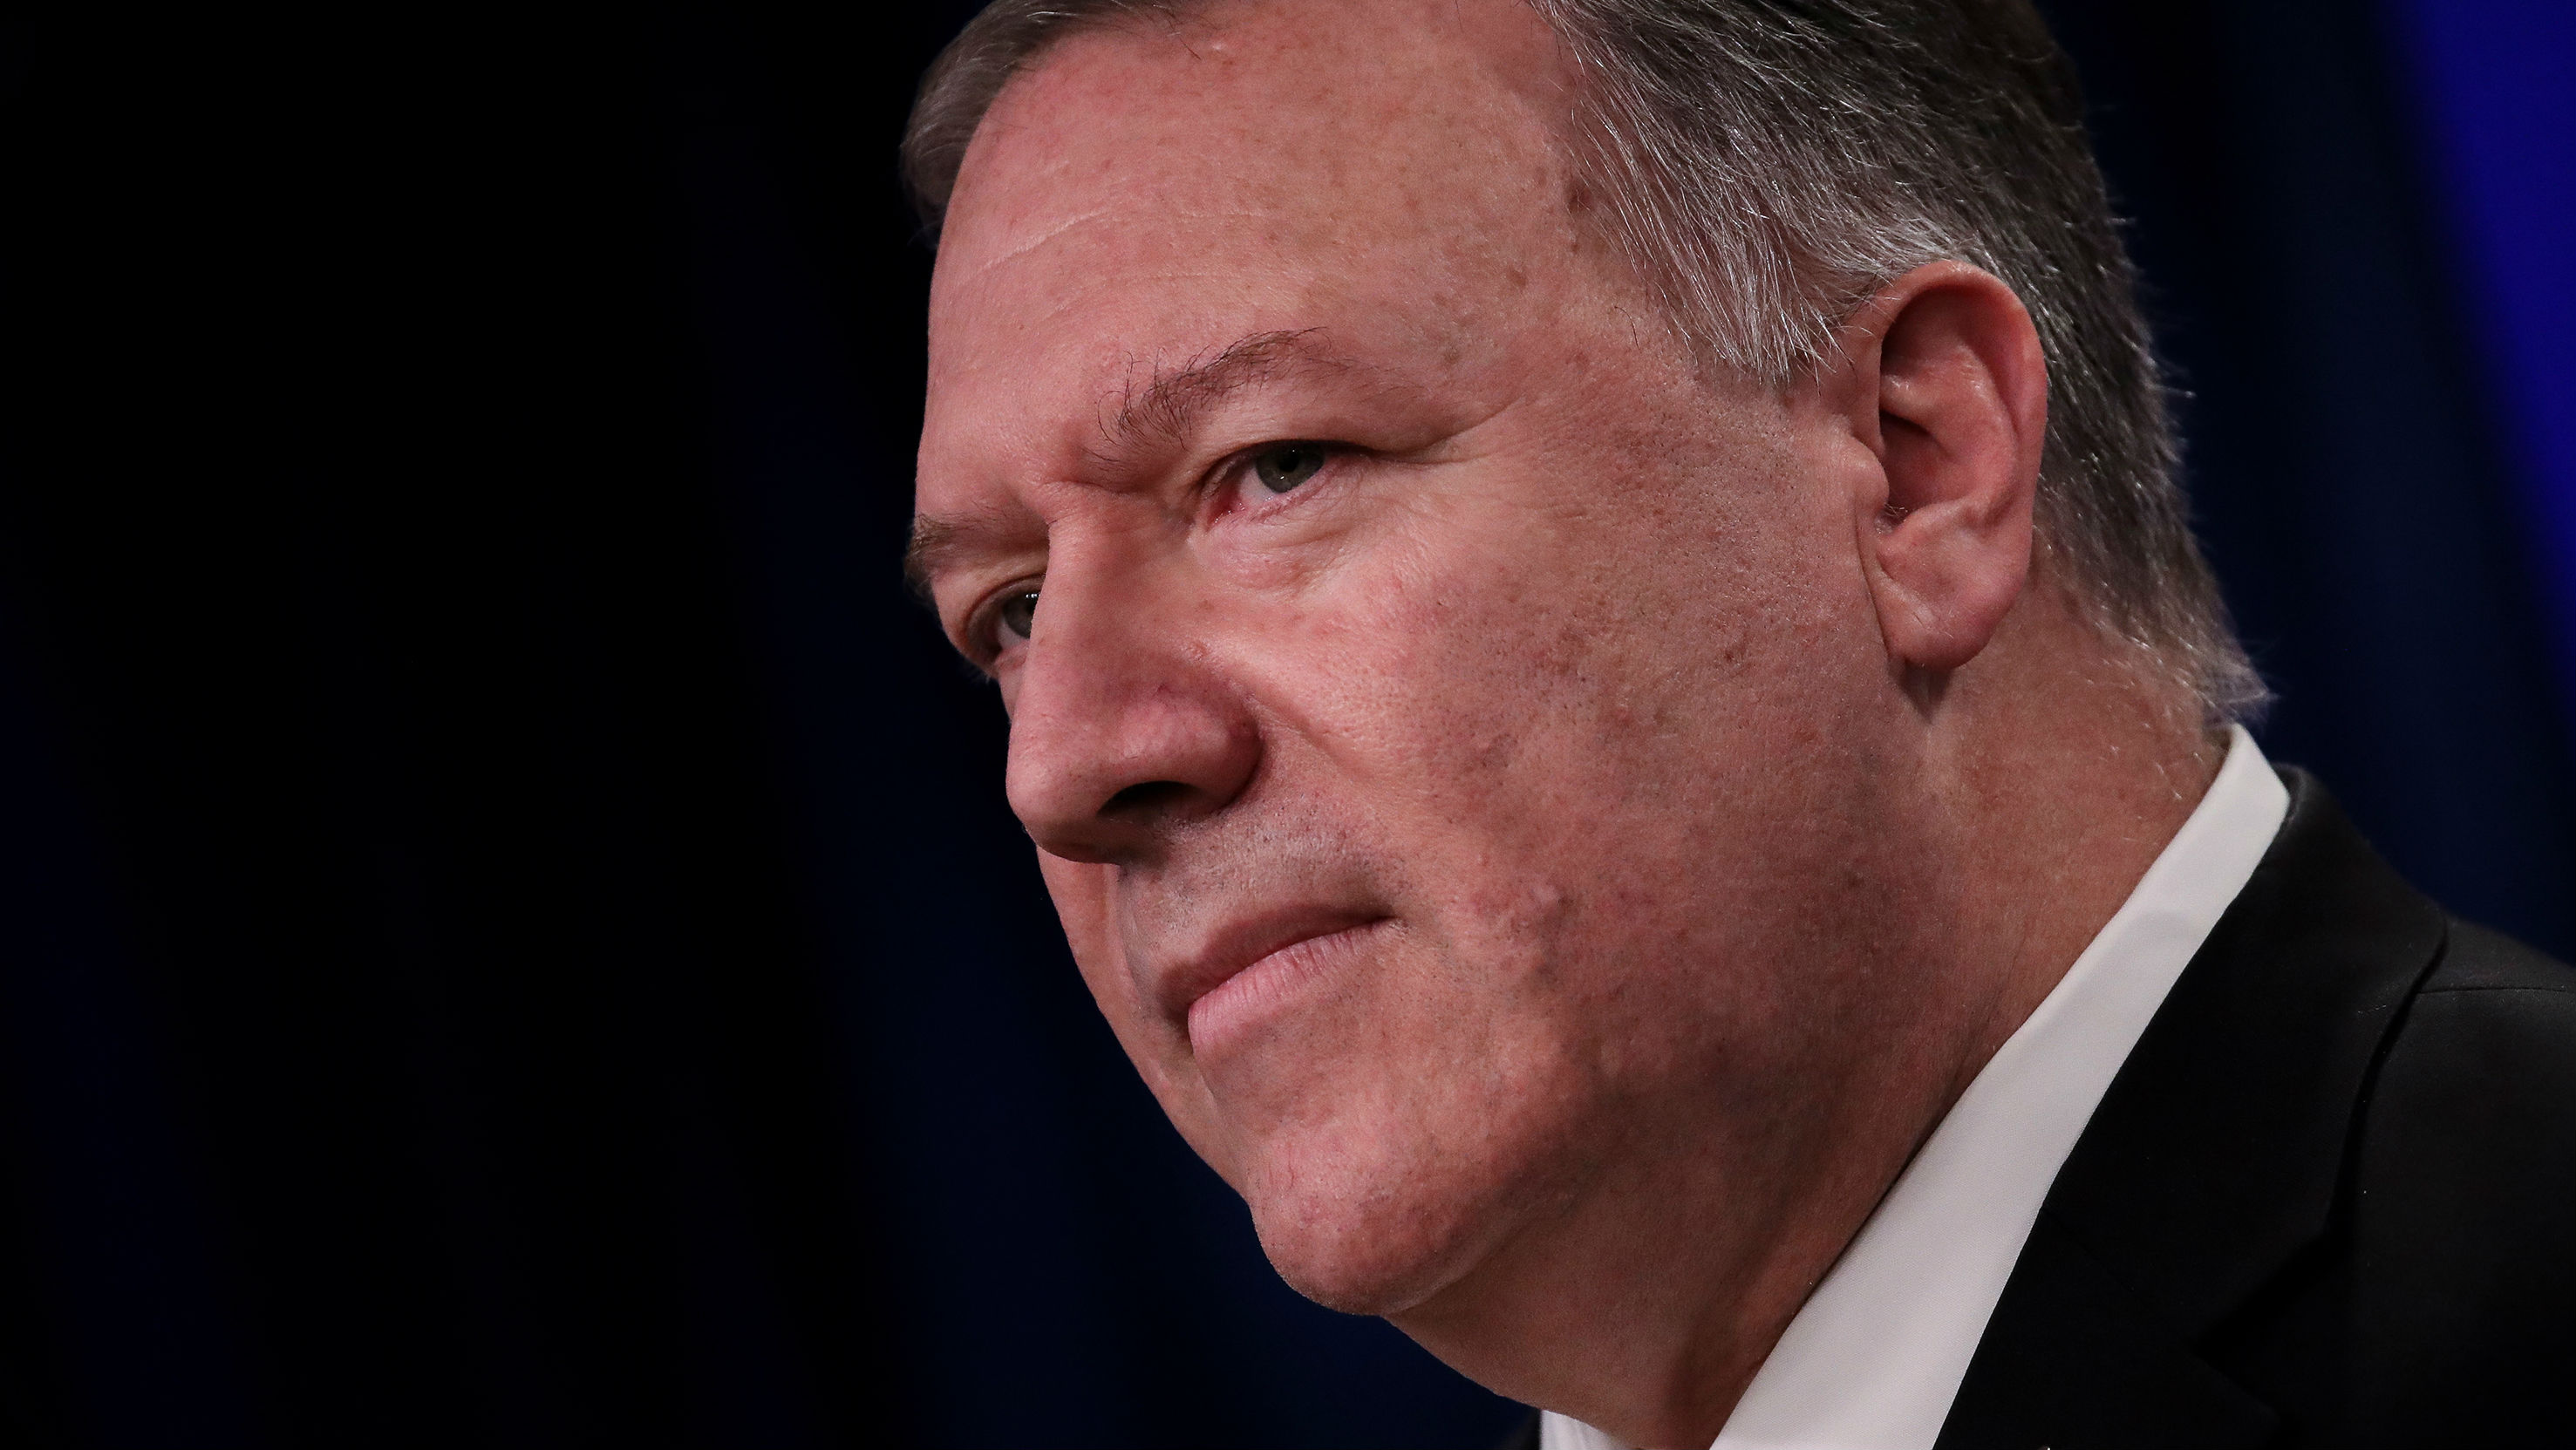 Mike Pompeo says 'significant' evidence new coronavirus emerged from Chinese lab